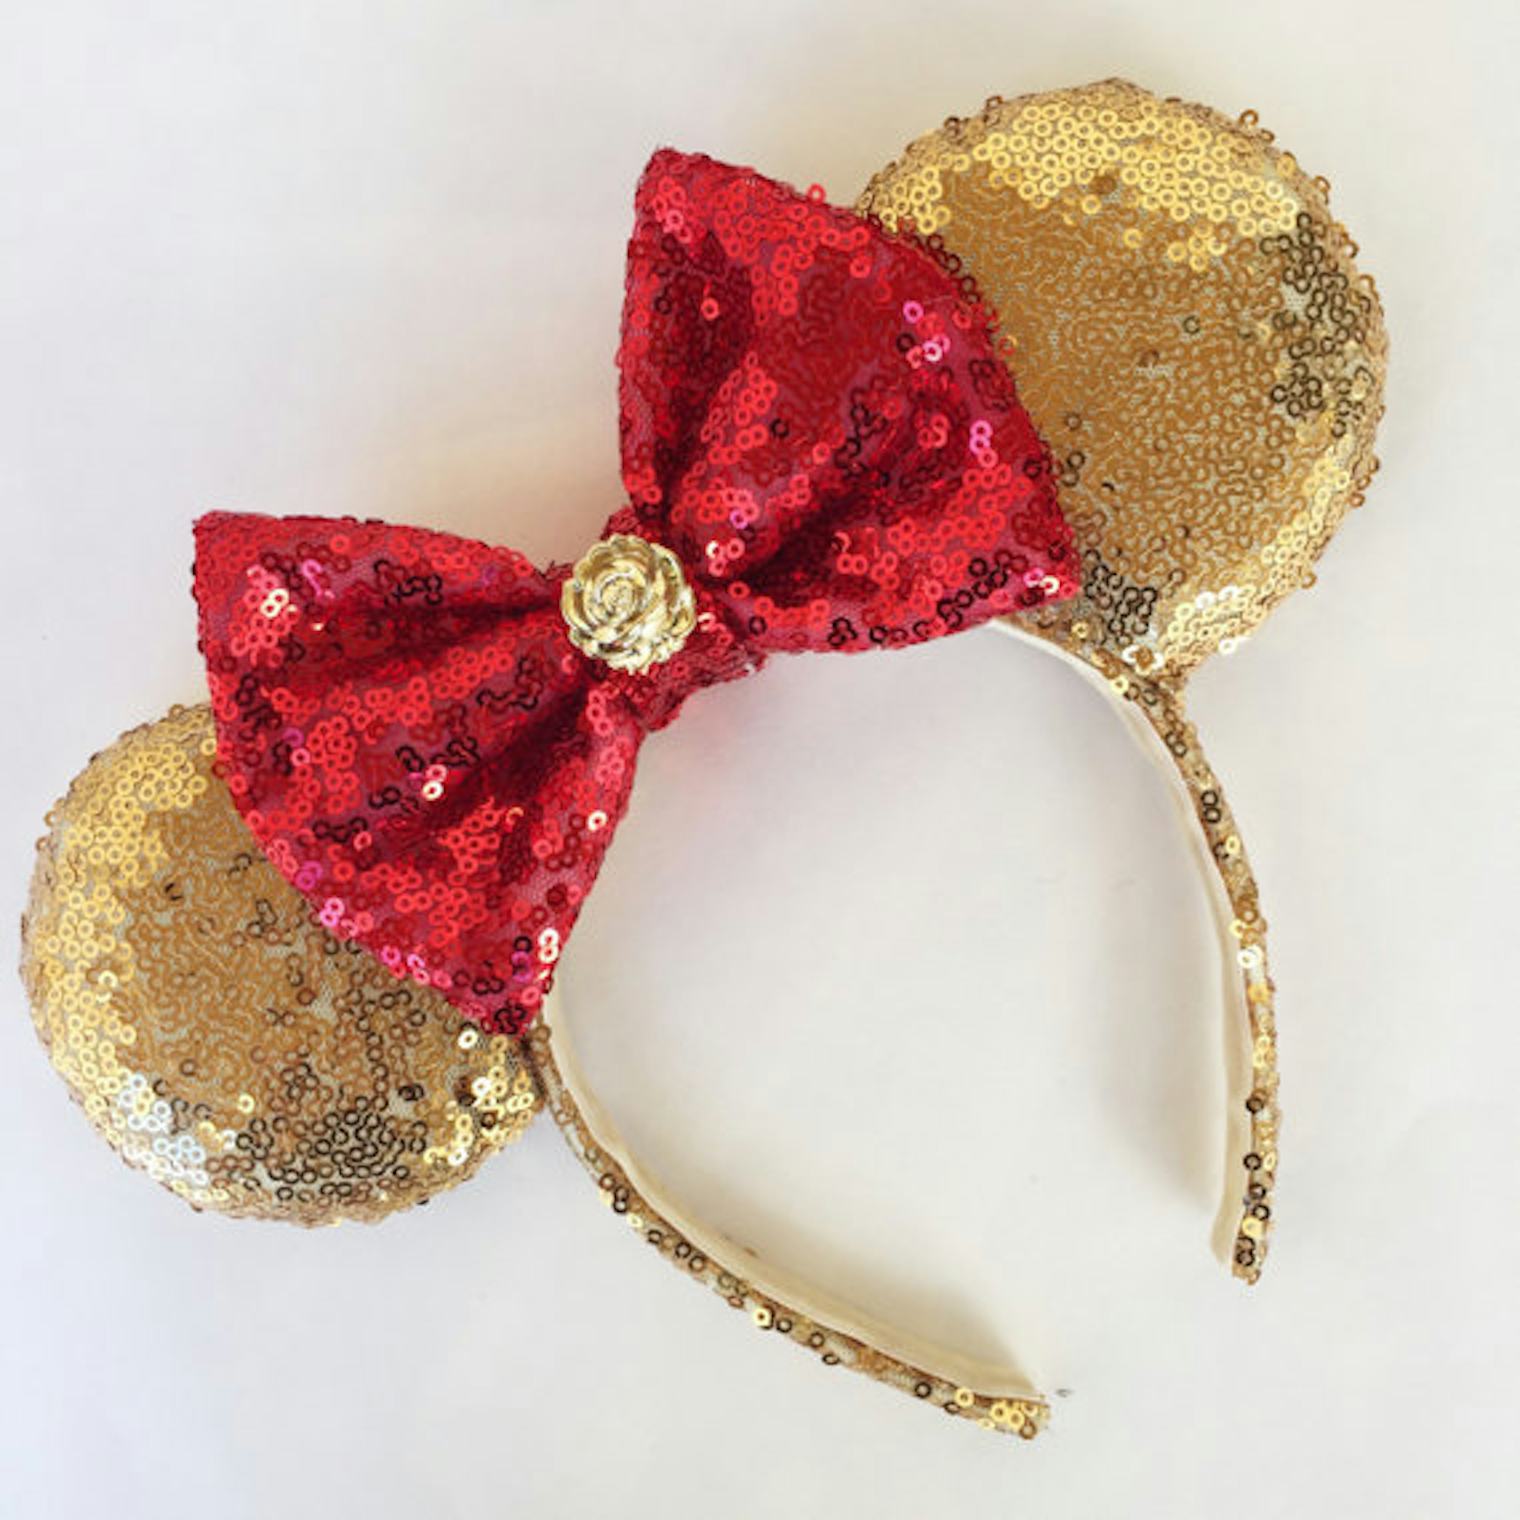 11 Cute Minnie Mouse Ears You Can Buy To Show Your Disney Spirit